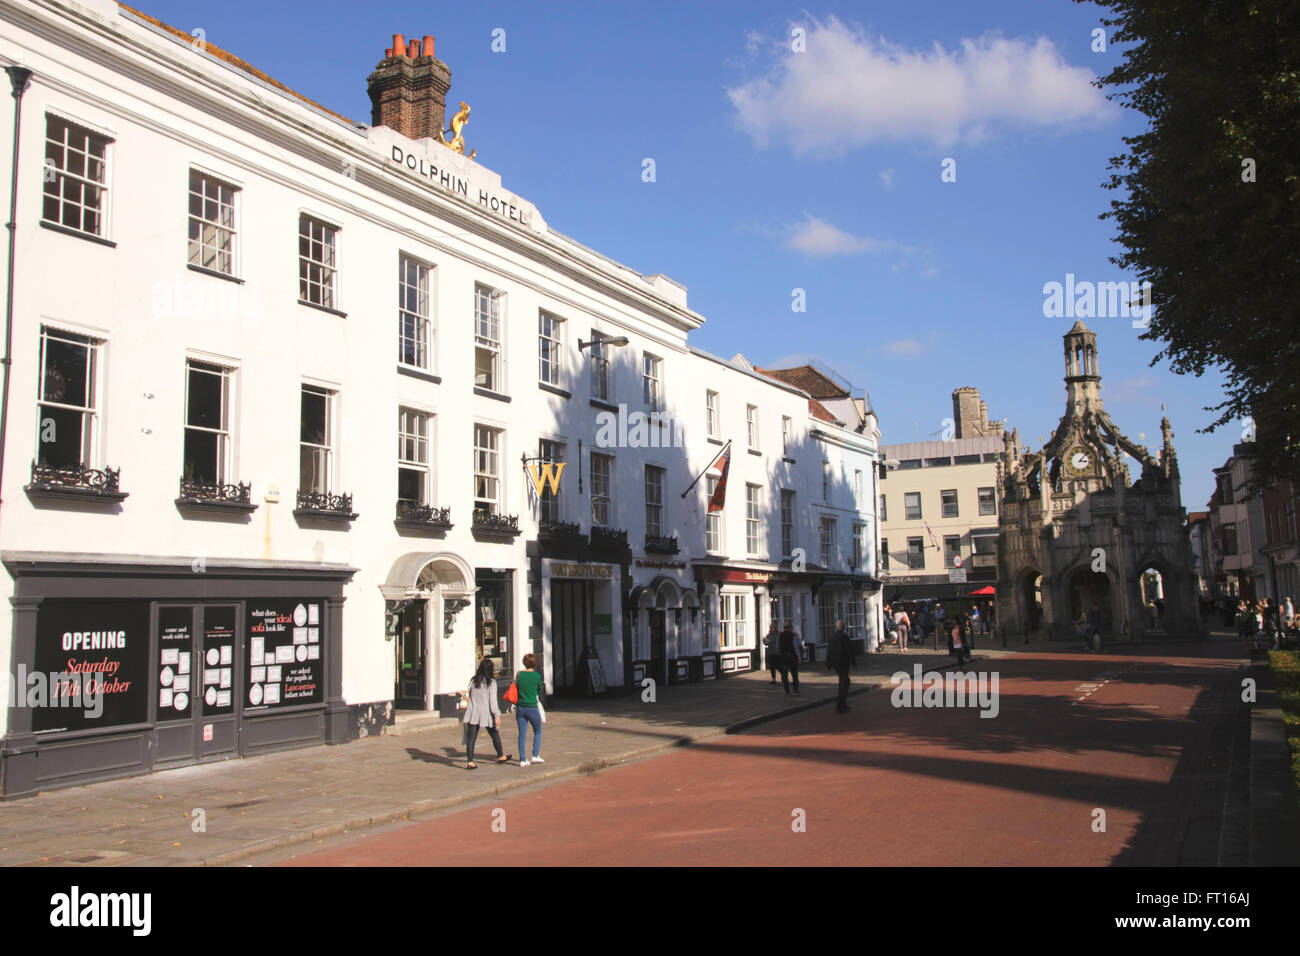 Dolphin Hotel and Chichester Cross in Chichester West Sussex Stock Photo